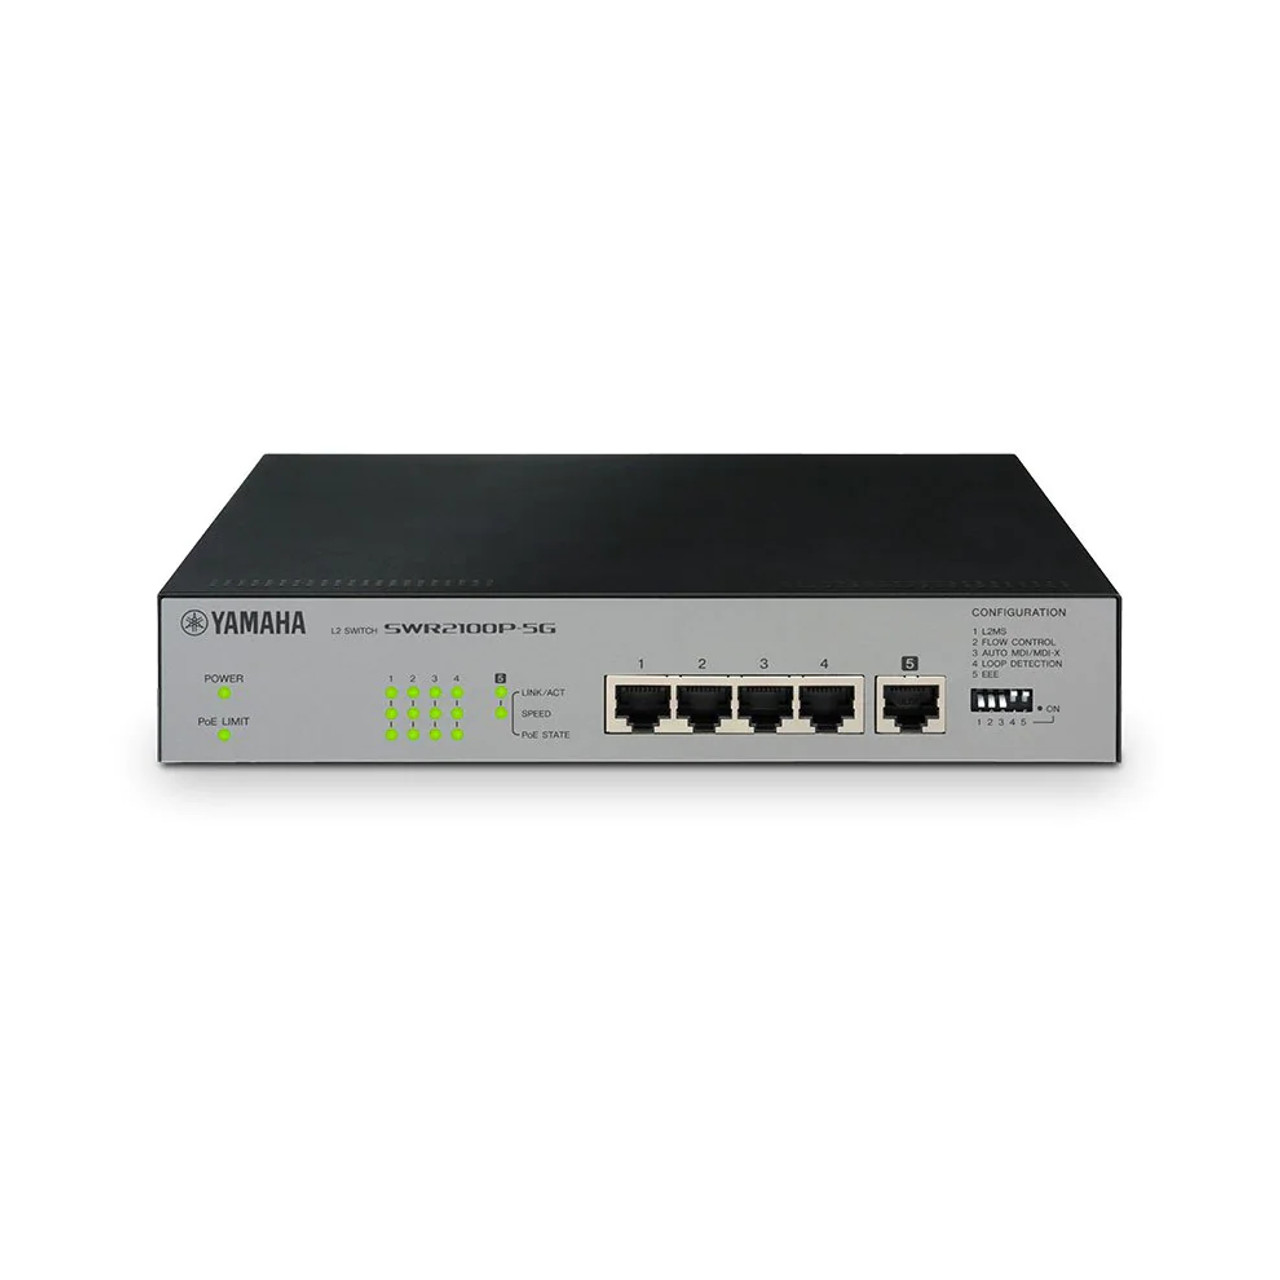 Yamaha SWR2100P 4/9-Port PoE L2 Network Switch with 1 Up Link